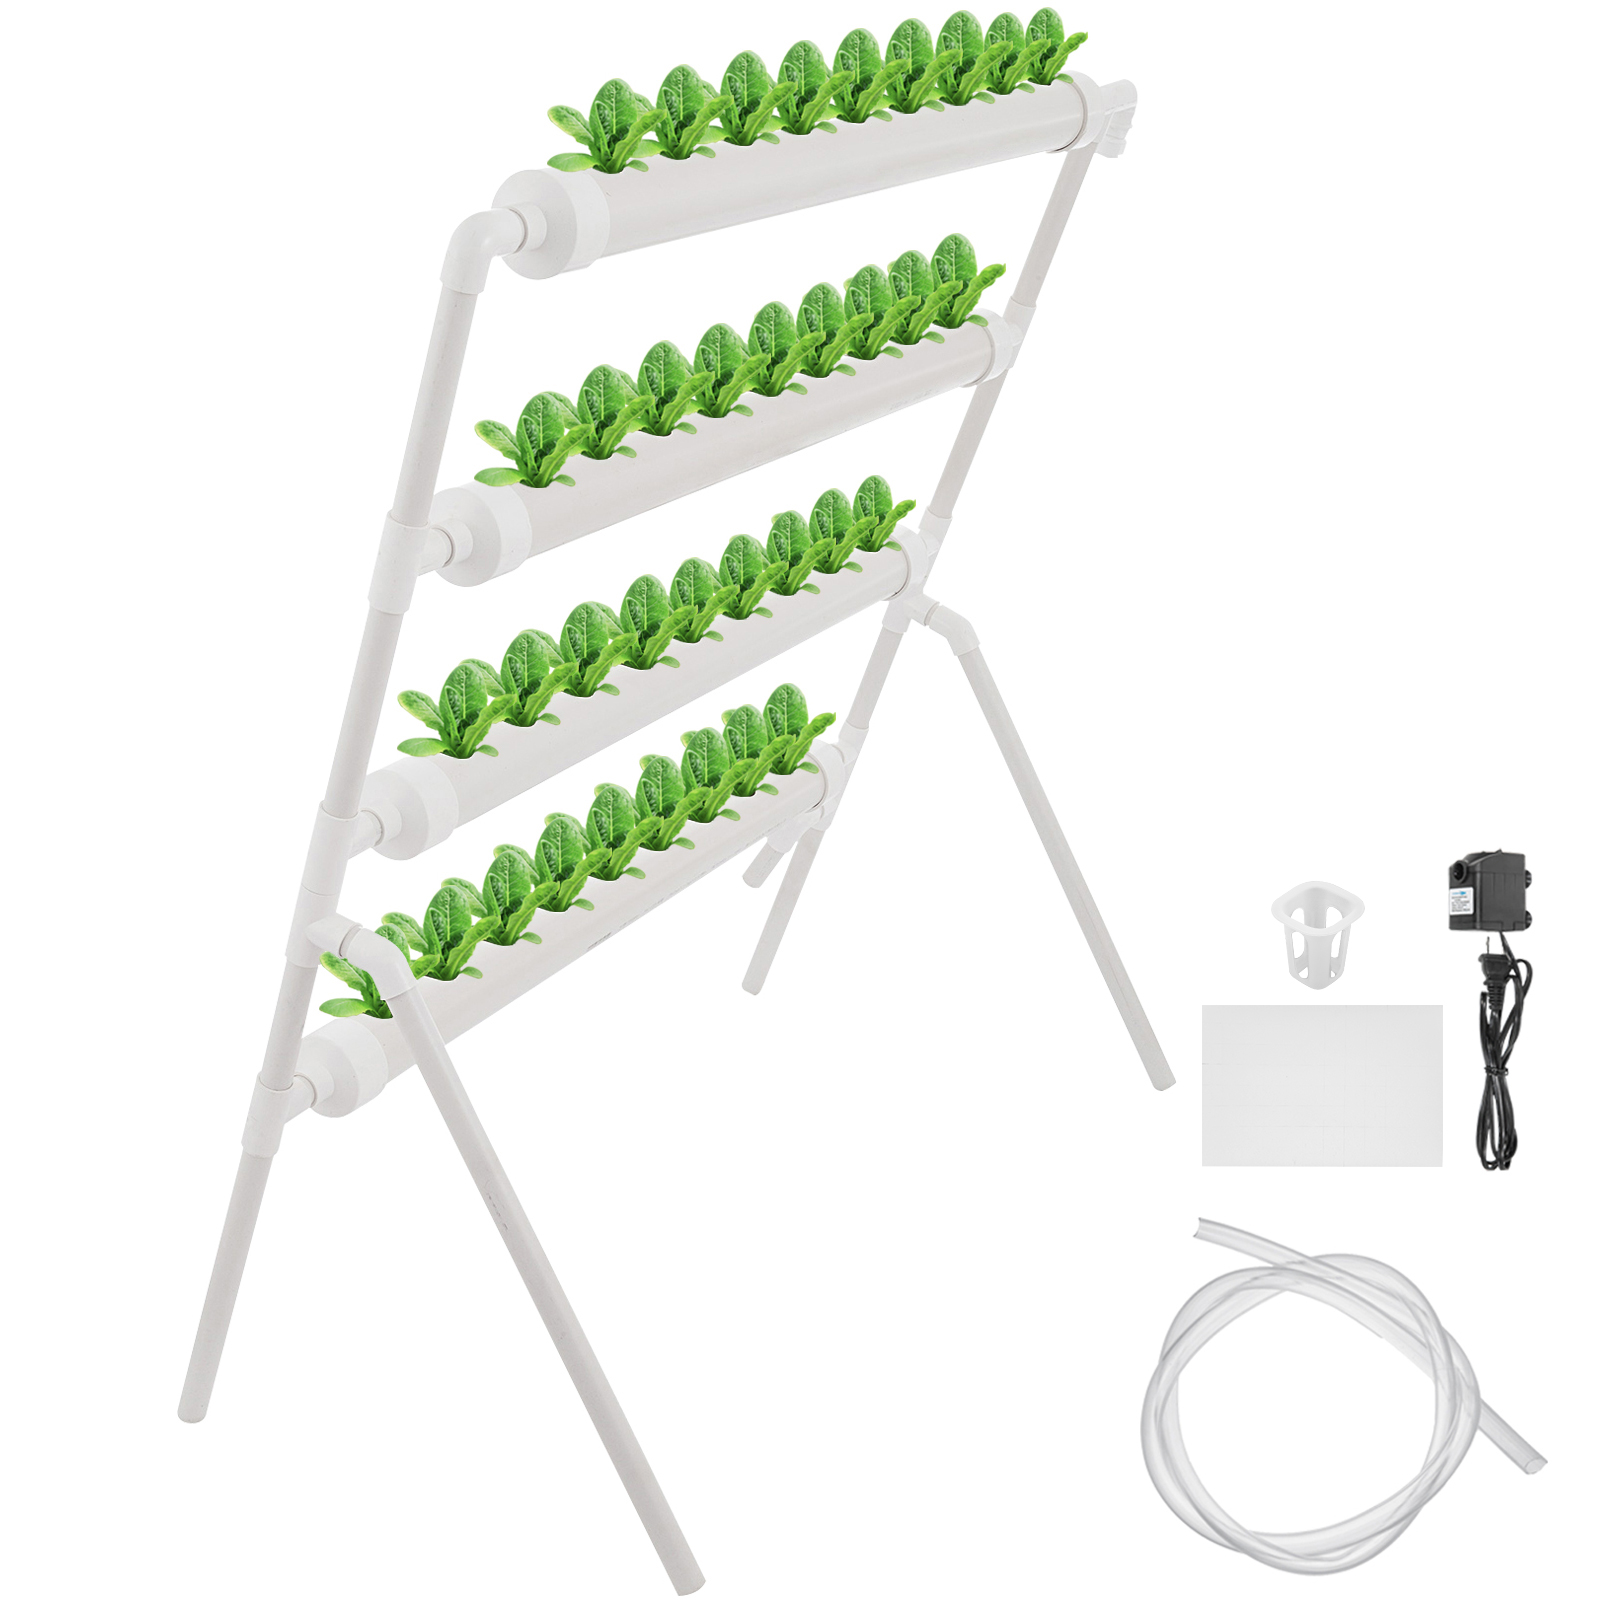 Vertical Type Hydroponic 36 Plant Sites Grow Kit with Pump Baskets Grow System 